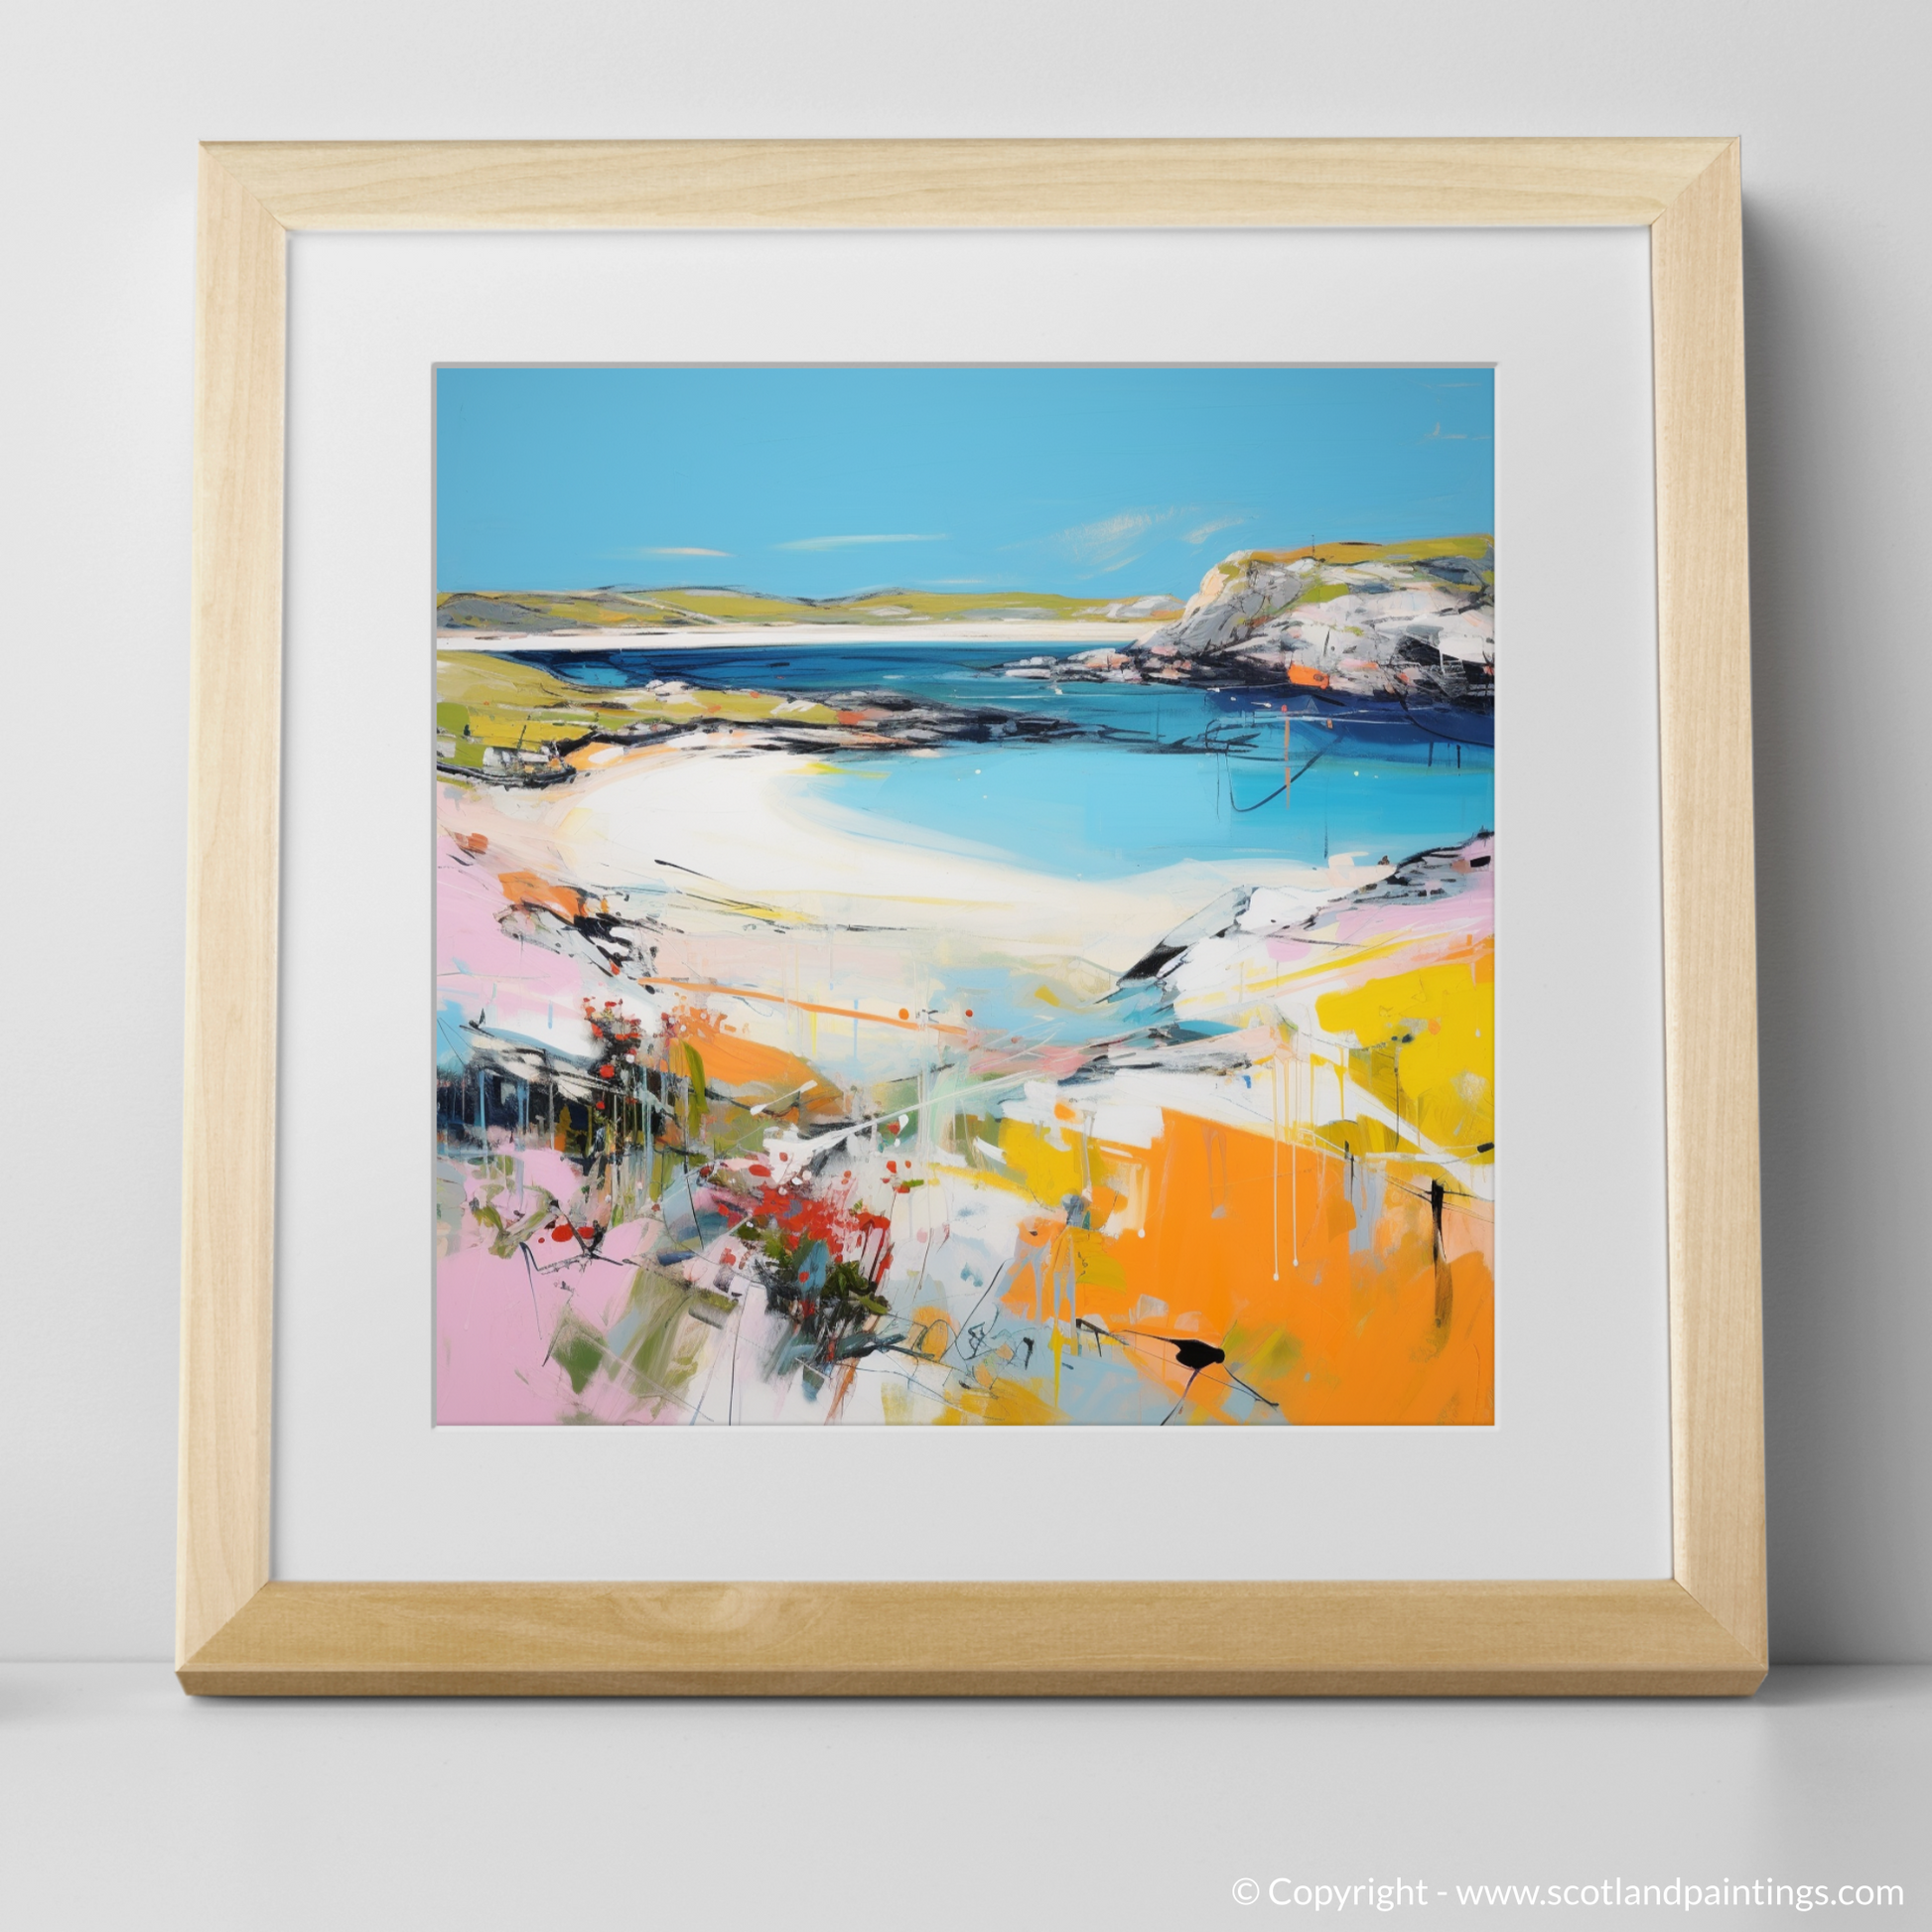 Art Print of Achmelvich Bay, Sutherland in summer with a natural frame